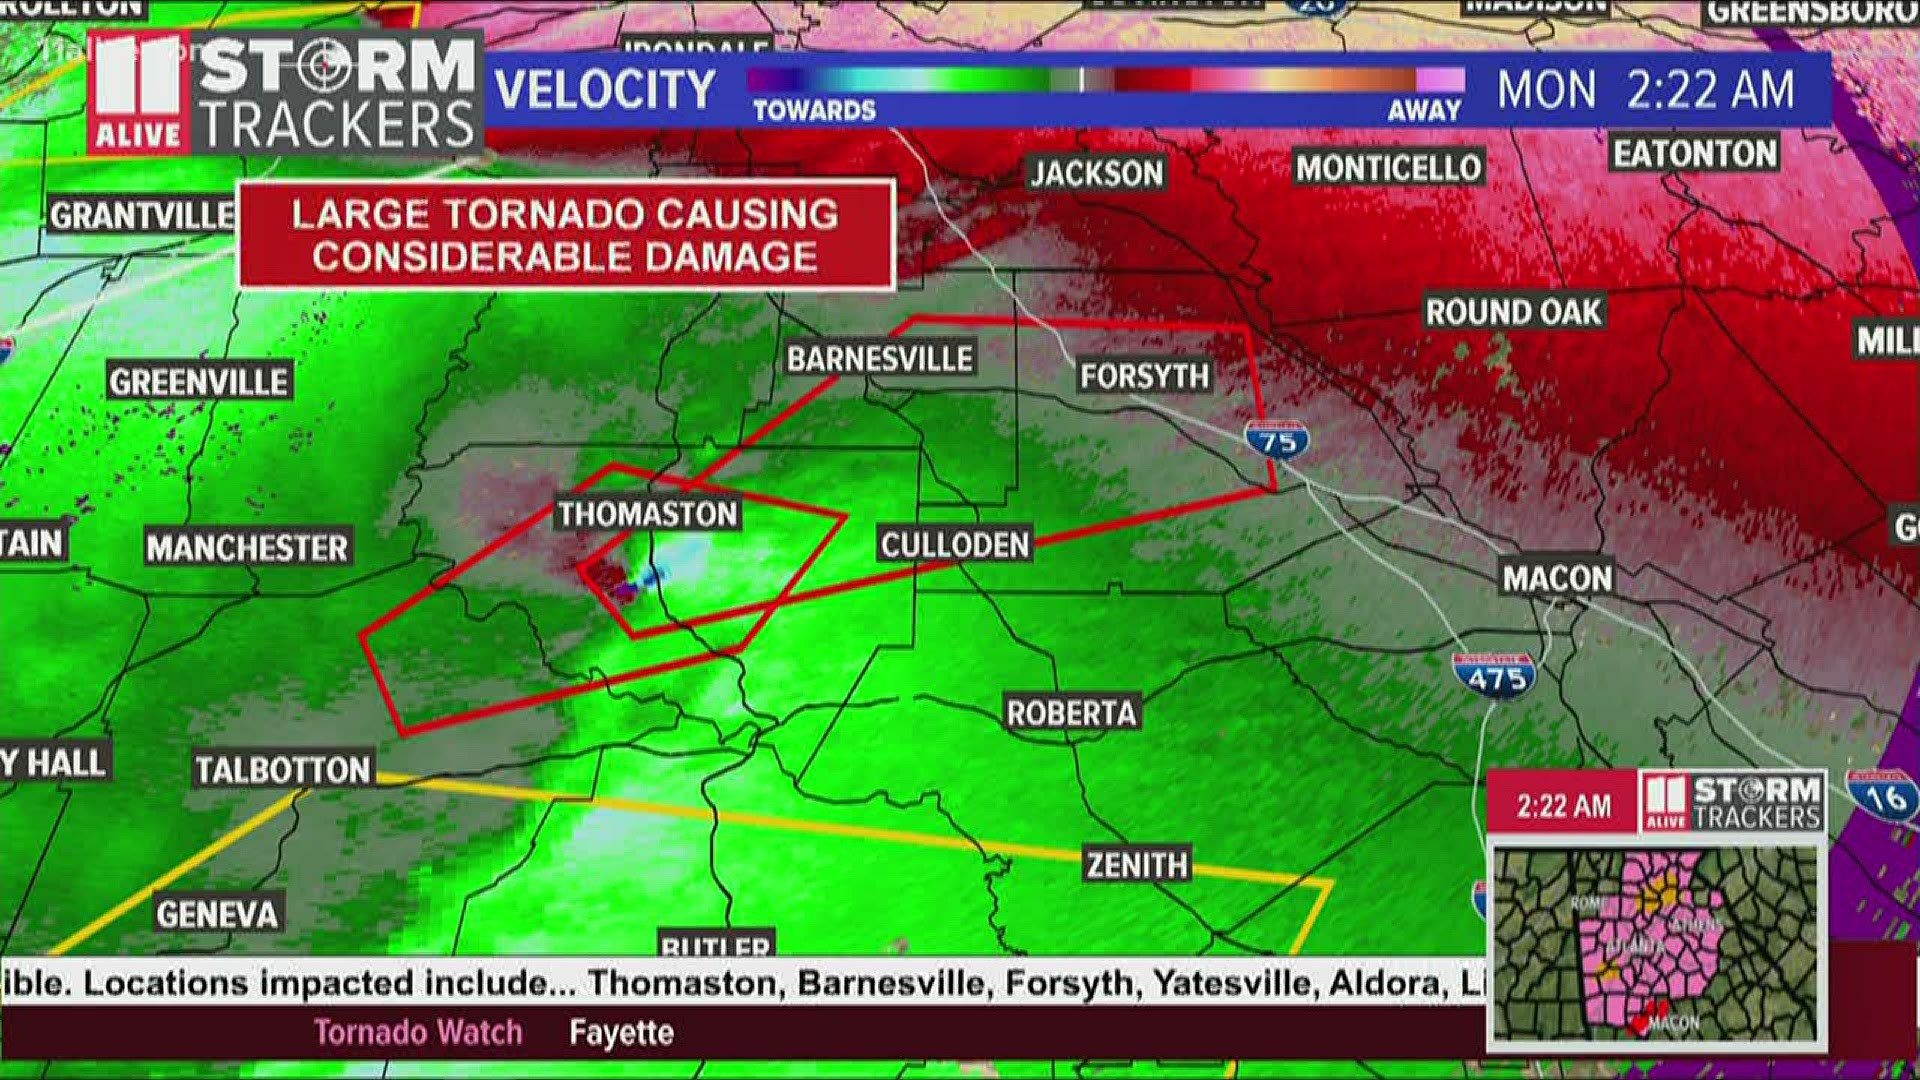 Tornado warning issued for Lamar, Monroe and Upson counties. The NWS said it was "extremely dangerous" with more than 70 mph winds.